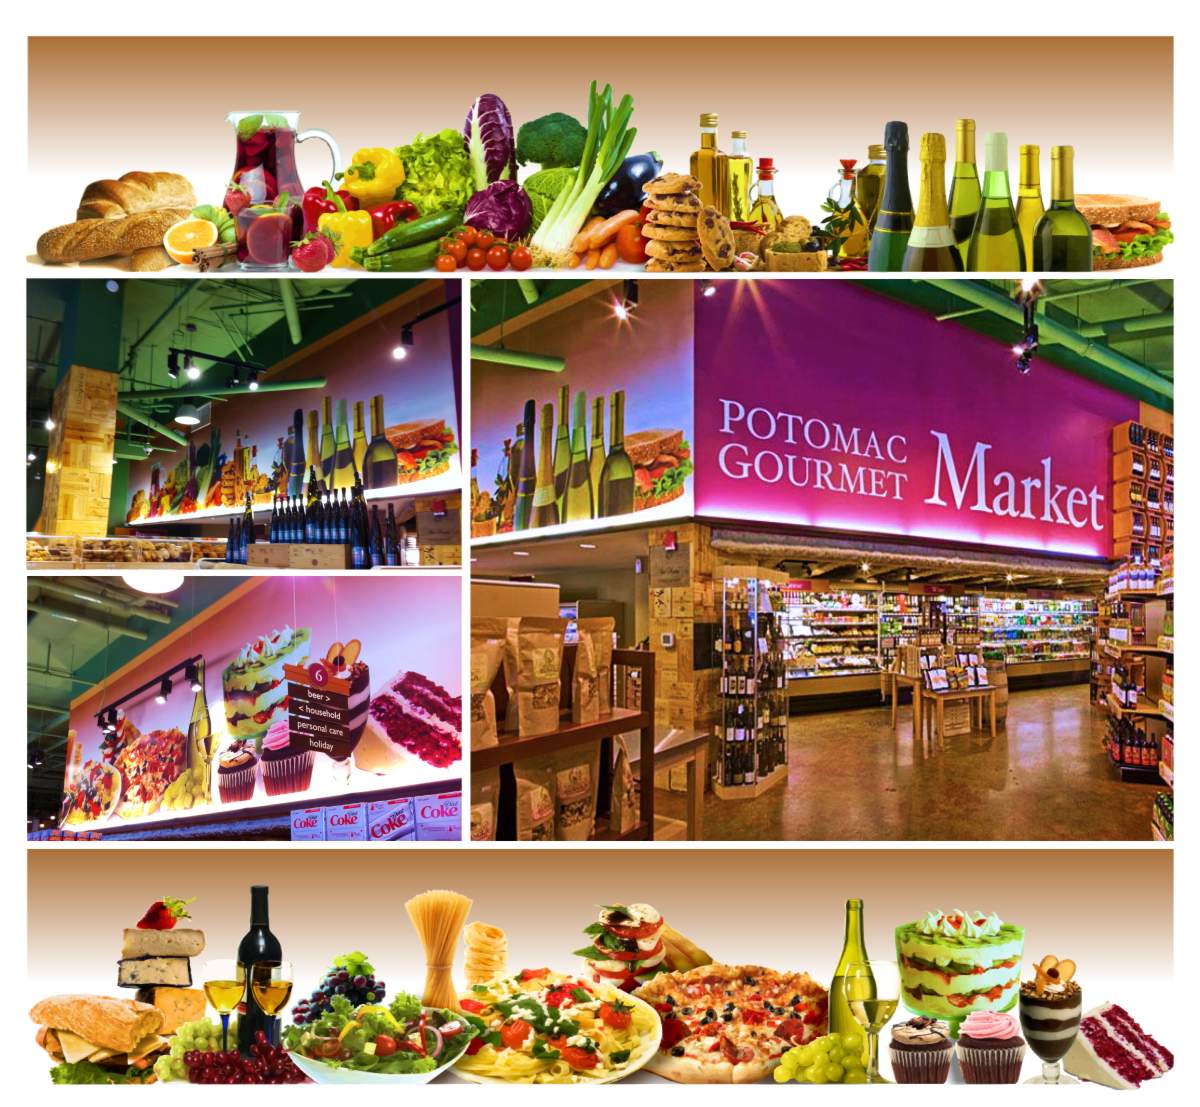 Potomac Gourmet Market at National Harbor is a specialty food and wine merchant. This photo shows two compositions of delicious food in still life wall murals, each 48 inches tall and 25 feet long that include a mouth watering array of colors depicted from left to right with crusty loaves of artisan bread, a pitcher of blood orange sangria, red and yellow peppers, red cabbage, green shallots, purple eggplant, orange carrots, stacks of chocolate chip cookies, tall bottles of golden seasoned herb olive oils, bruchetta, a series of 6 wine bottles with green glass, backlit chardonnay white wine wrapped with gold or black foil and neck bands, followed by a club sandwich on toasted sesame seed bread. The second mural features cheese and cured meats on a crusty French baguette, a stack of creamy white and orange cheeses with black or natural rinds, next to two wine filled goblets with blue stems in front of bunches of green and red grapes, a white bowl with a mixed green salad, a plate of pasta topped with fresh basil, shaved cheese and fresh tomatoes, with a fan of tall dried spaghetti and stacks of dried linguini pasta nests standing behind the plate, next is a stack of fresh mozzarella layered with fresh tomatoes, olives and cracked  ground pepper, a bubbly crusted pepperoni pizza, and ending with sumptuous desserts including a multi layer strawberry and kiwi trifle, two chocolate cupcakes with mocha and strawberry icing, a vanilla and chocolate layered mousse in a goblet and a thick slice of cream cheese frosted red velvet cake. Graphic design by Mark Ksiazewski at Centre Street Creative         